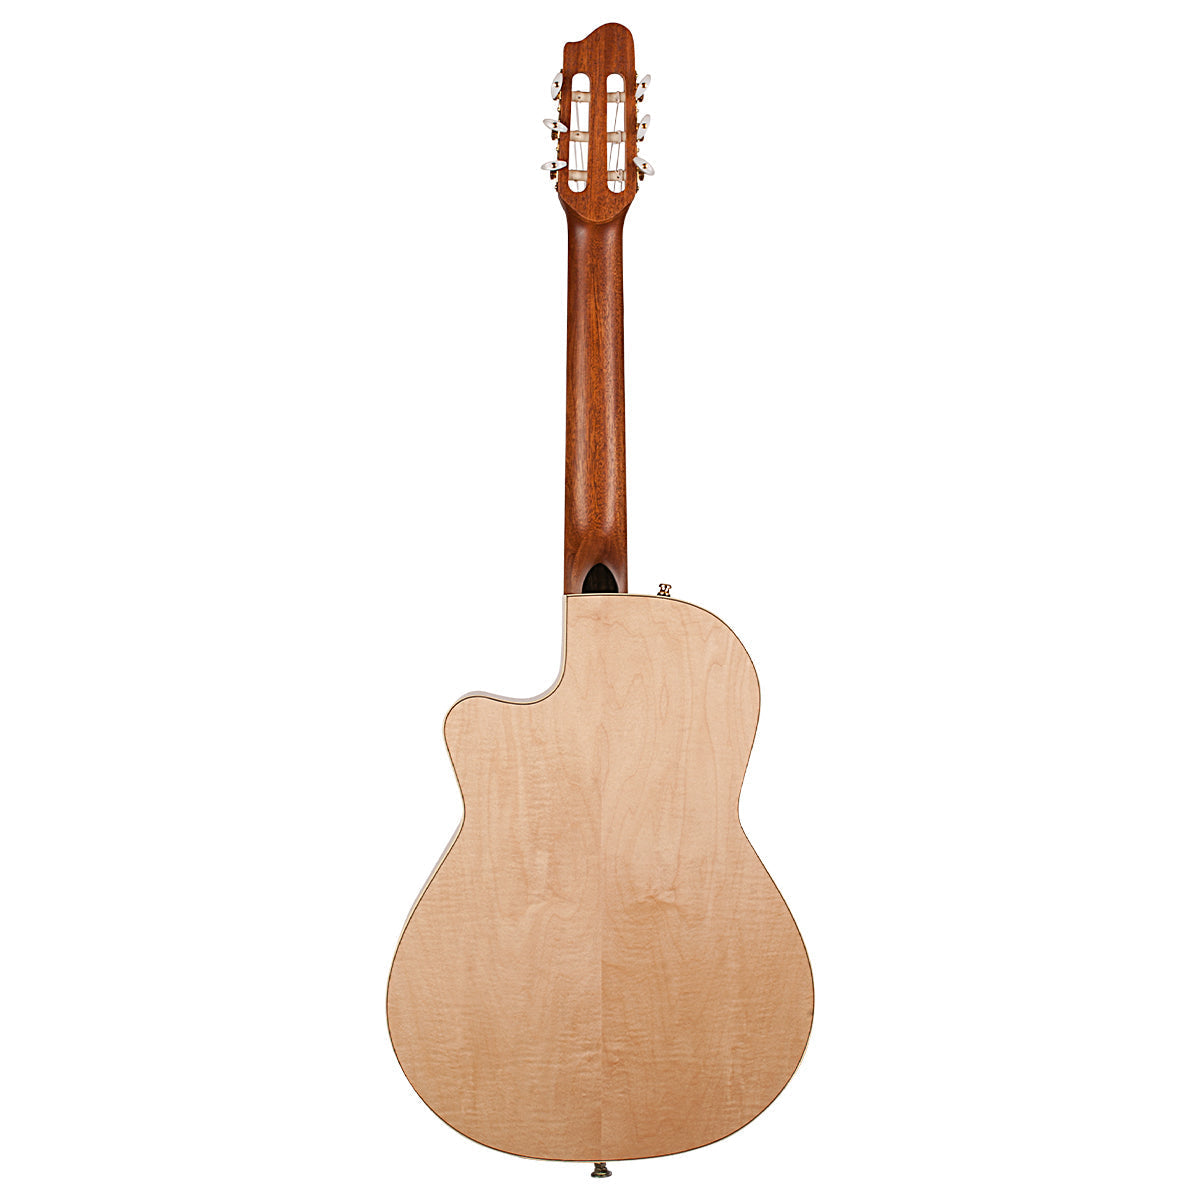 Godin Arena Flame Maple Cutaway Clasica II Nylon String Electro Guitar,  for sale at Richards Guitars.